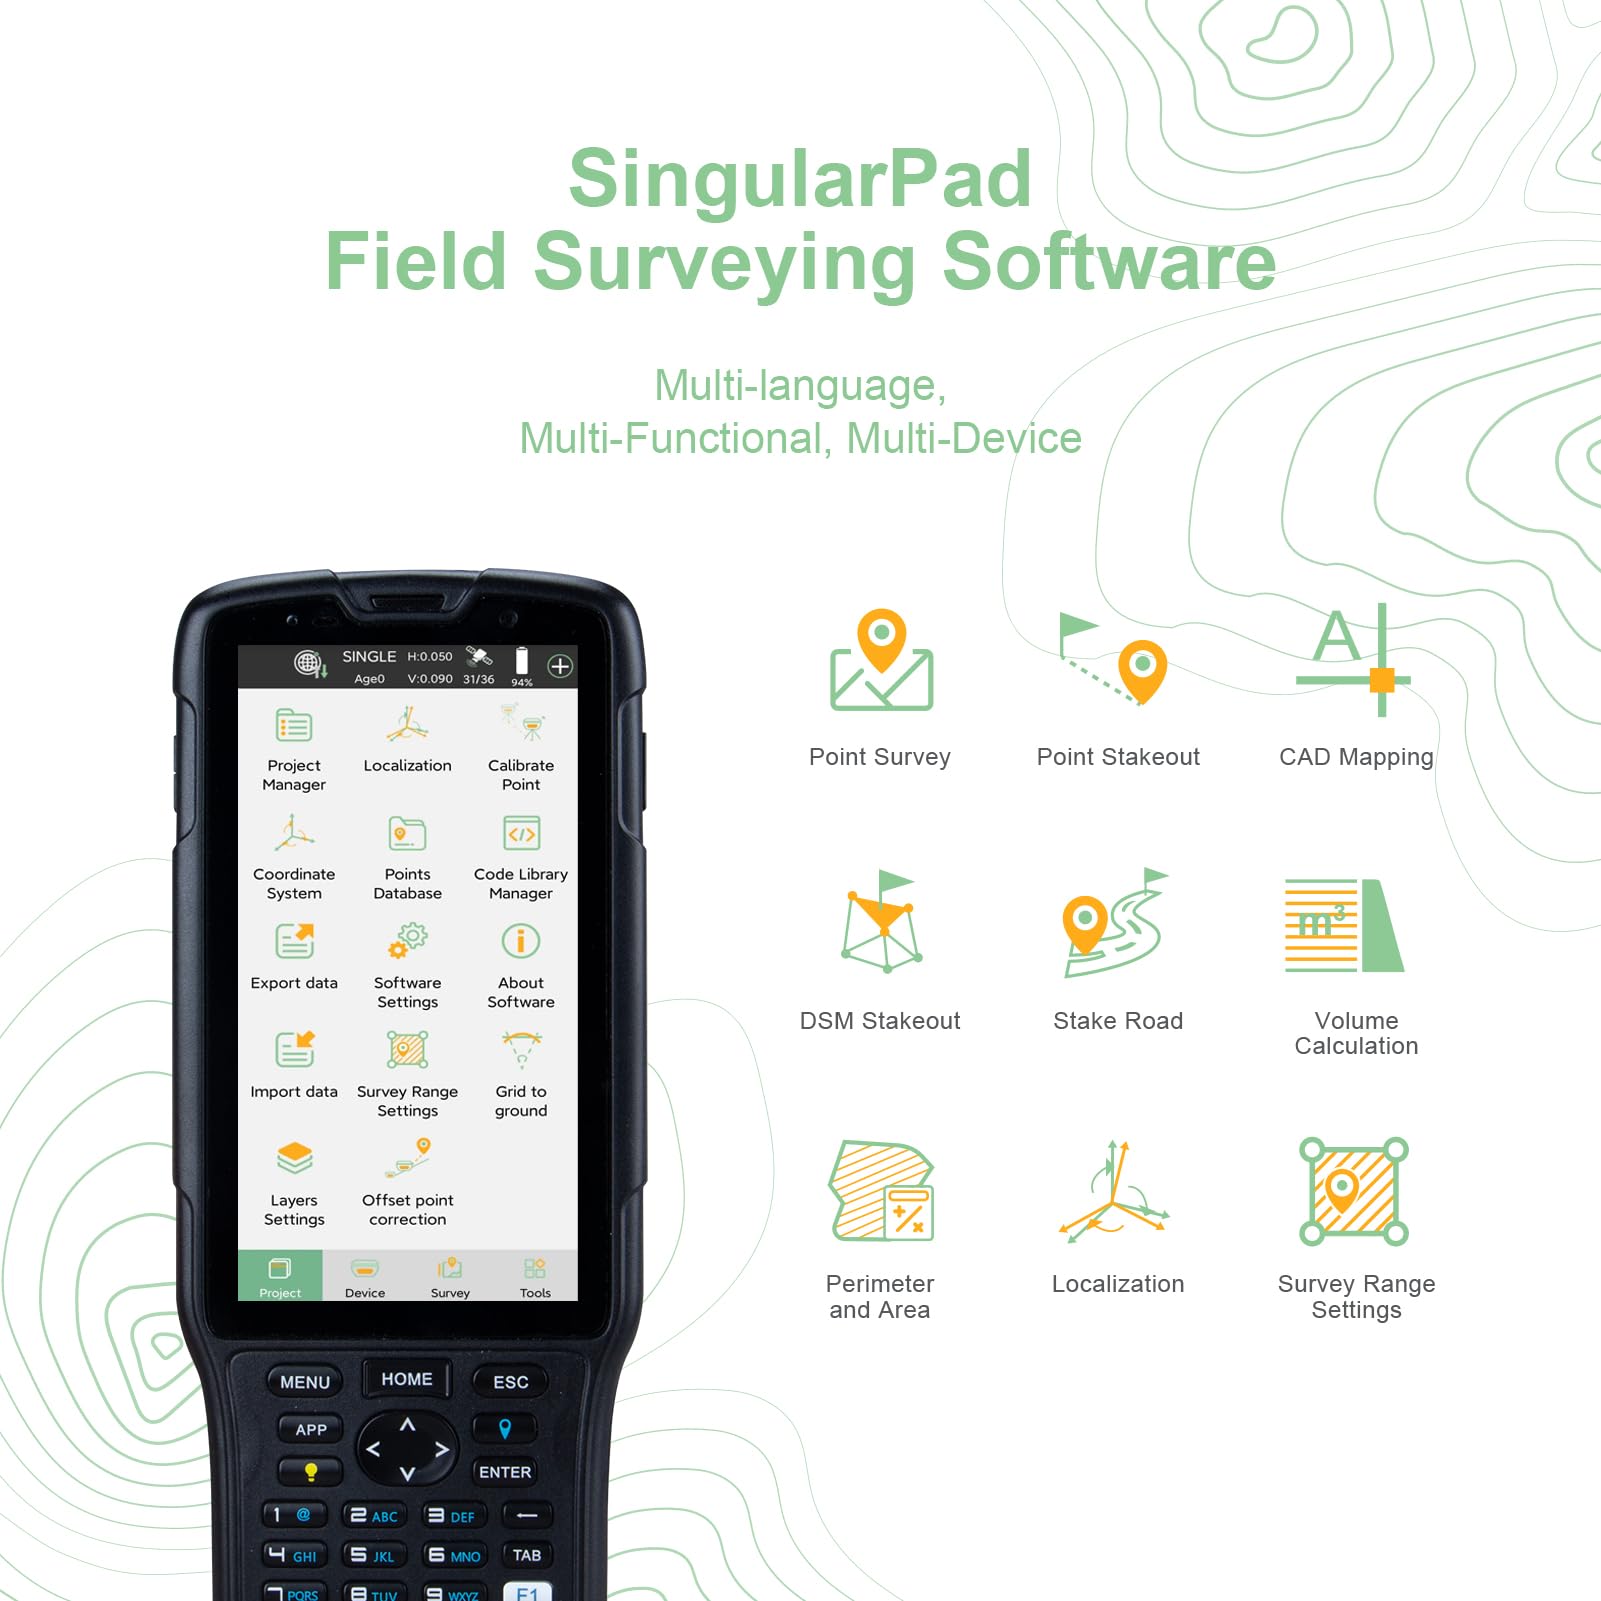 SingularXYZ RTK GNSS Survey Equipment with Handheld GPS Rover for Surveying, Handheld Controller, Survey Software and Transport Case, for Construction and Geodetic or Land Survey Layout Planning